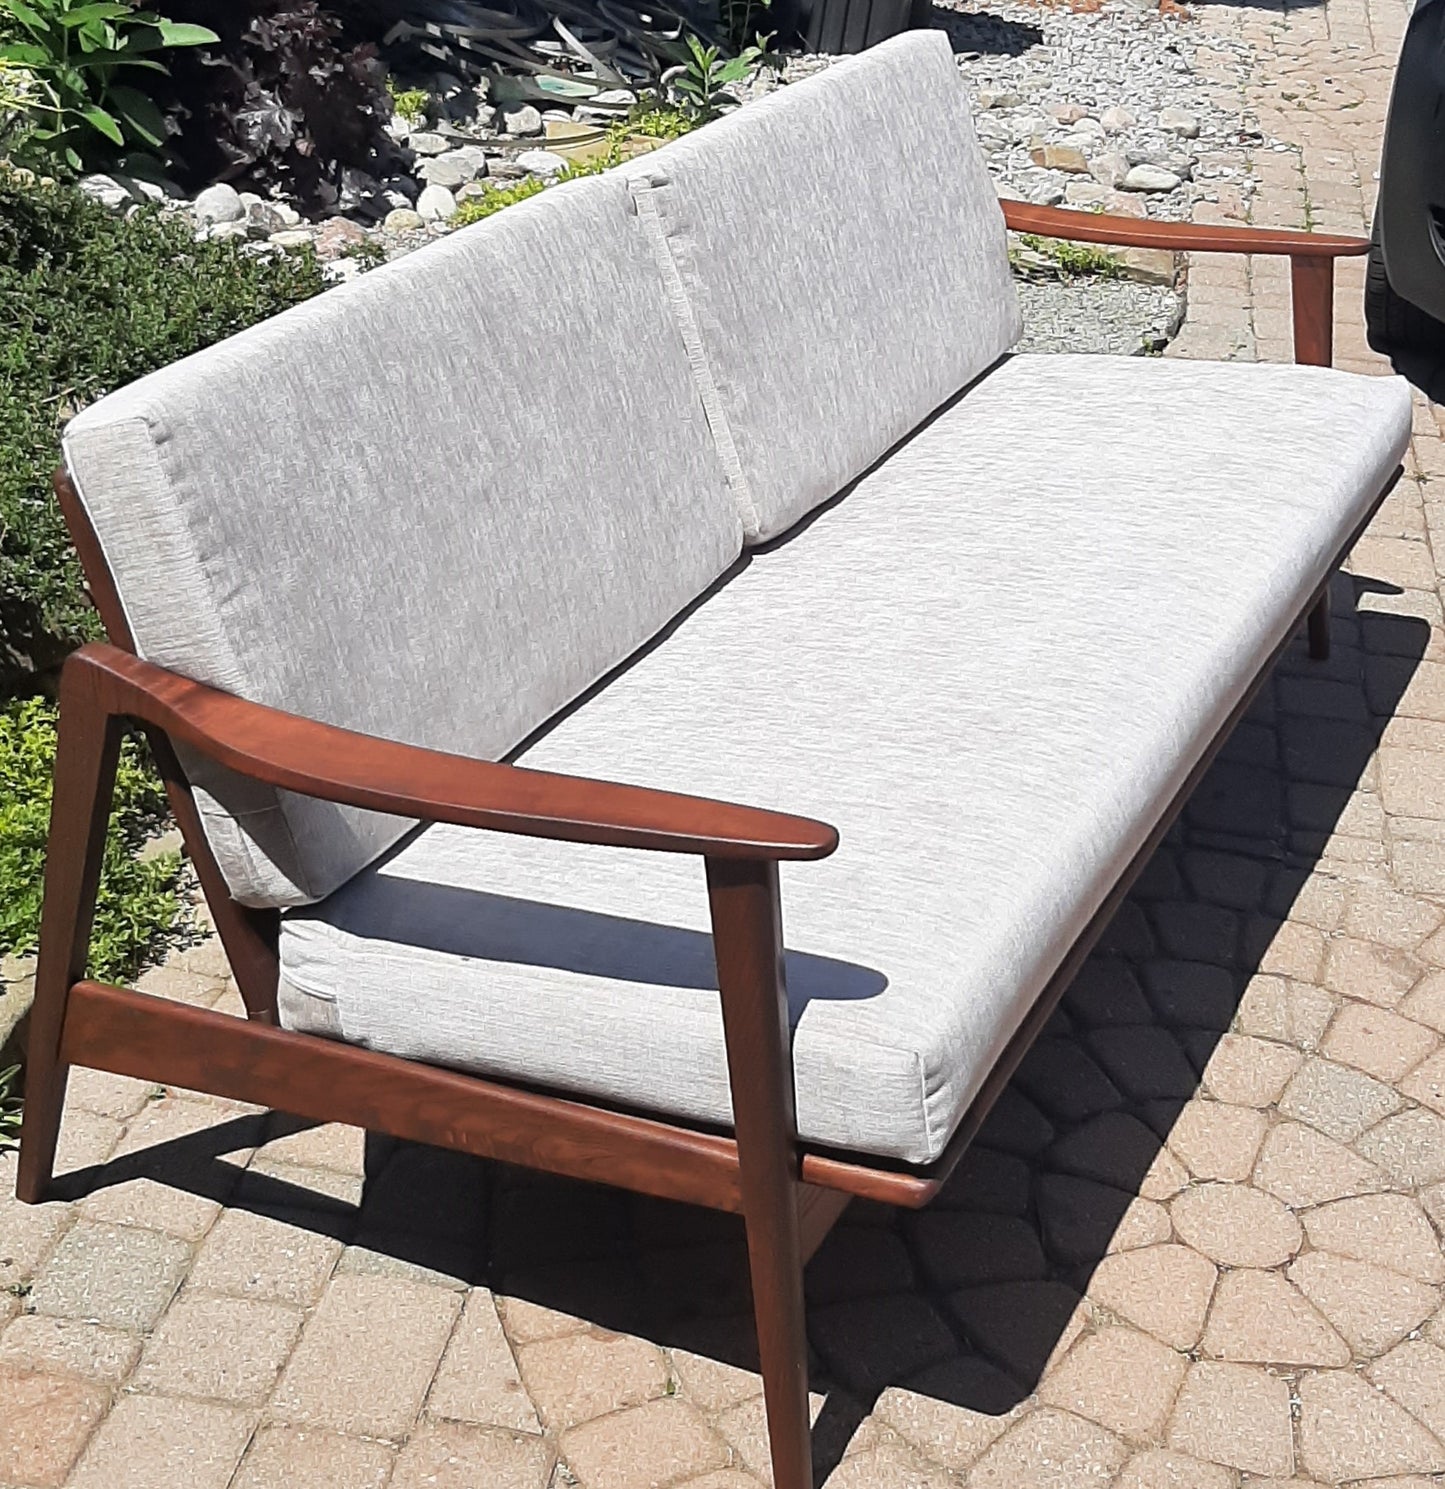 REFINISHED Mid Century Modern 3-Seater Sofa NEW CUSHIONS in Knoll stain resistant grey fabric